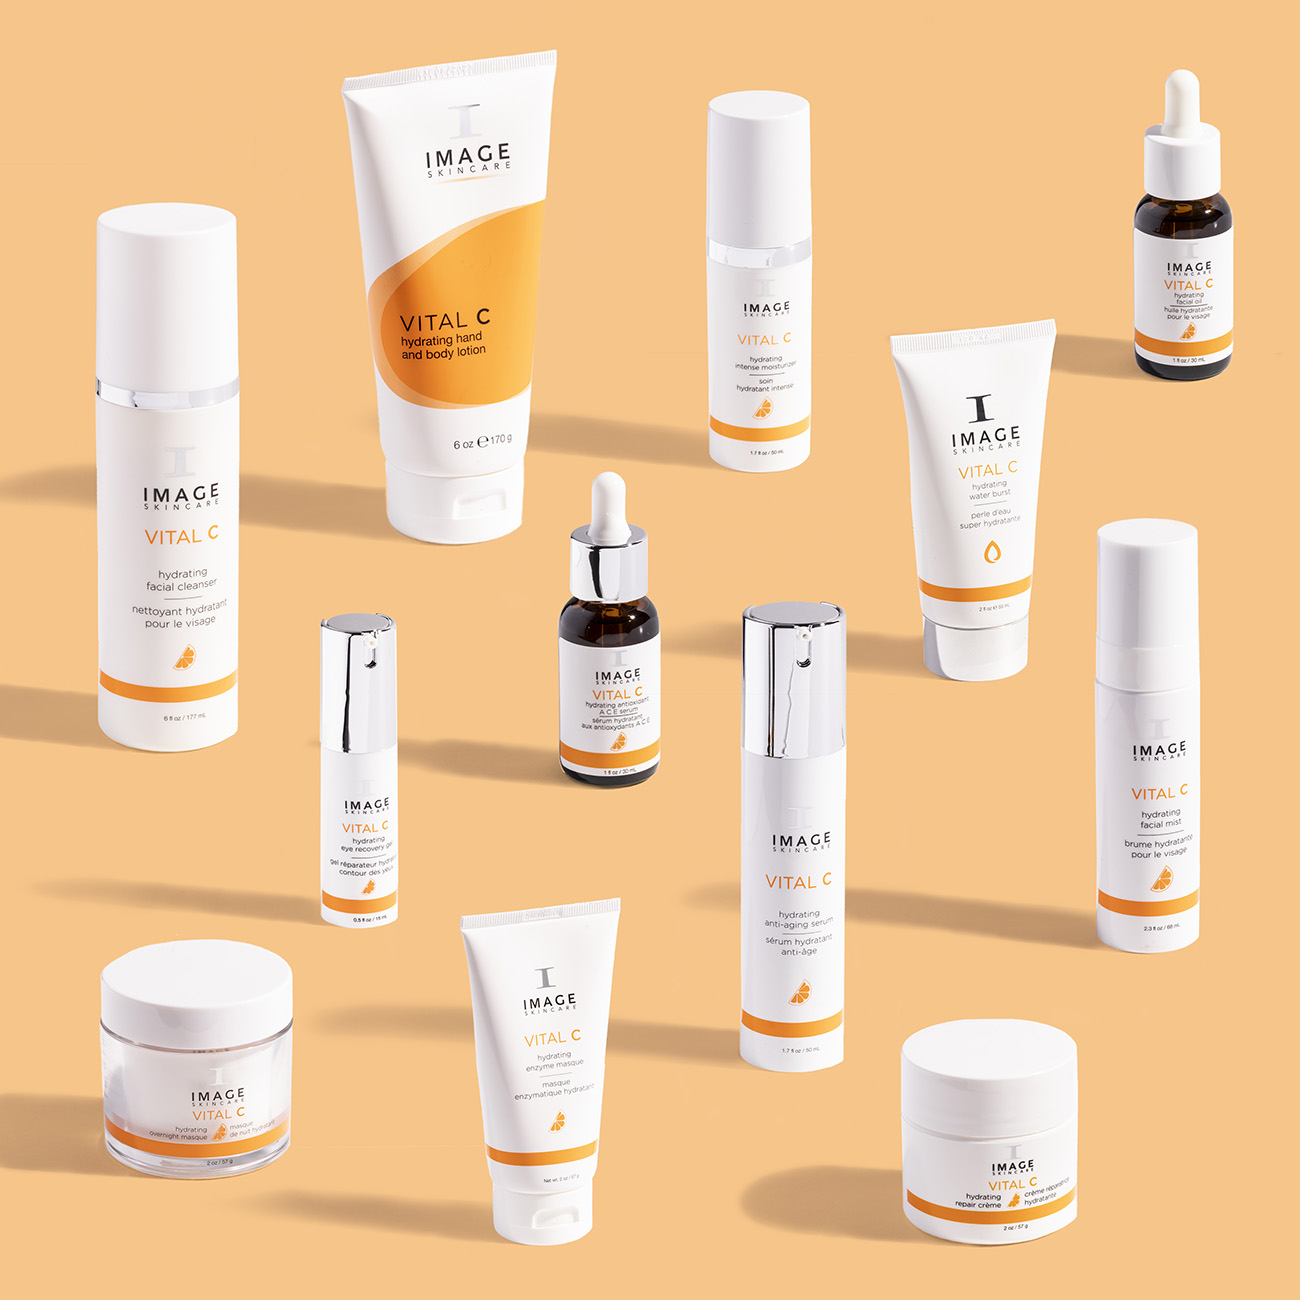 IMAGE Skin Care Products